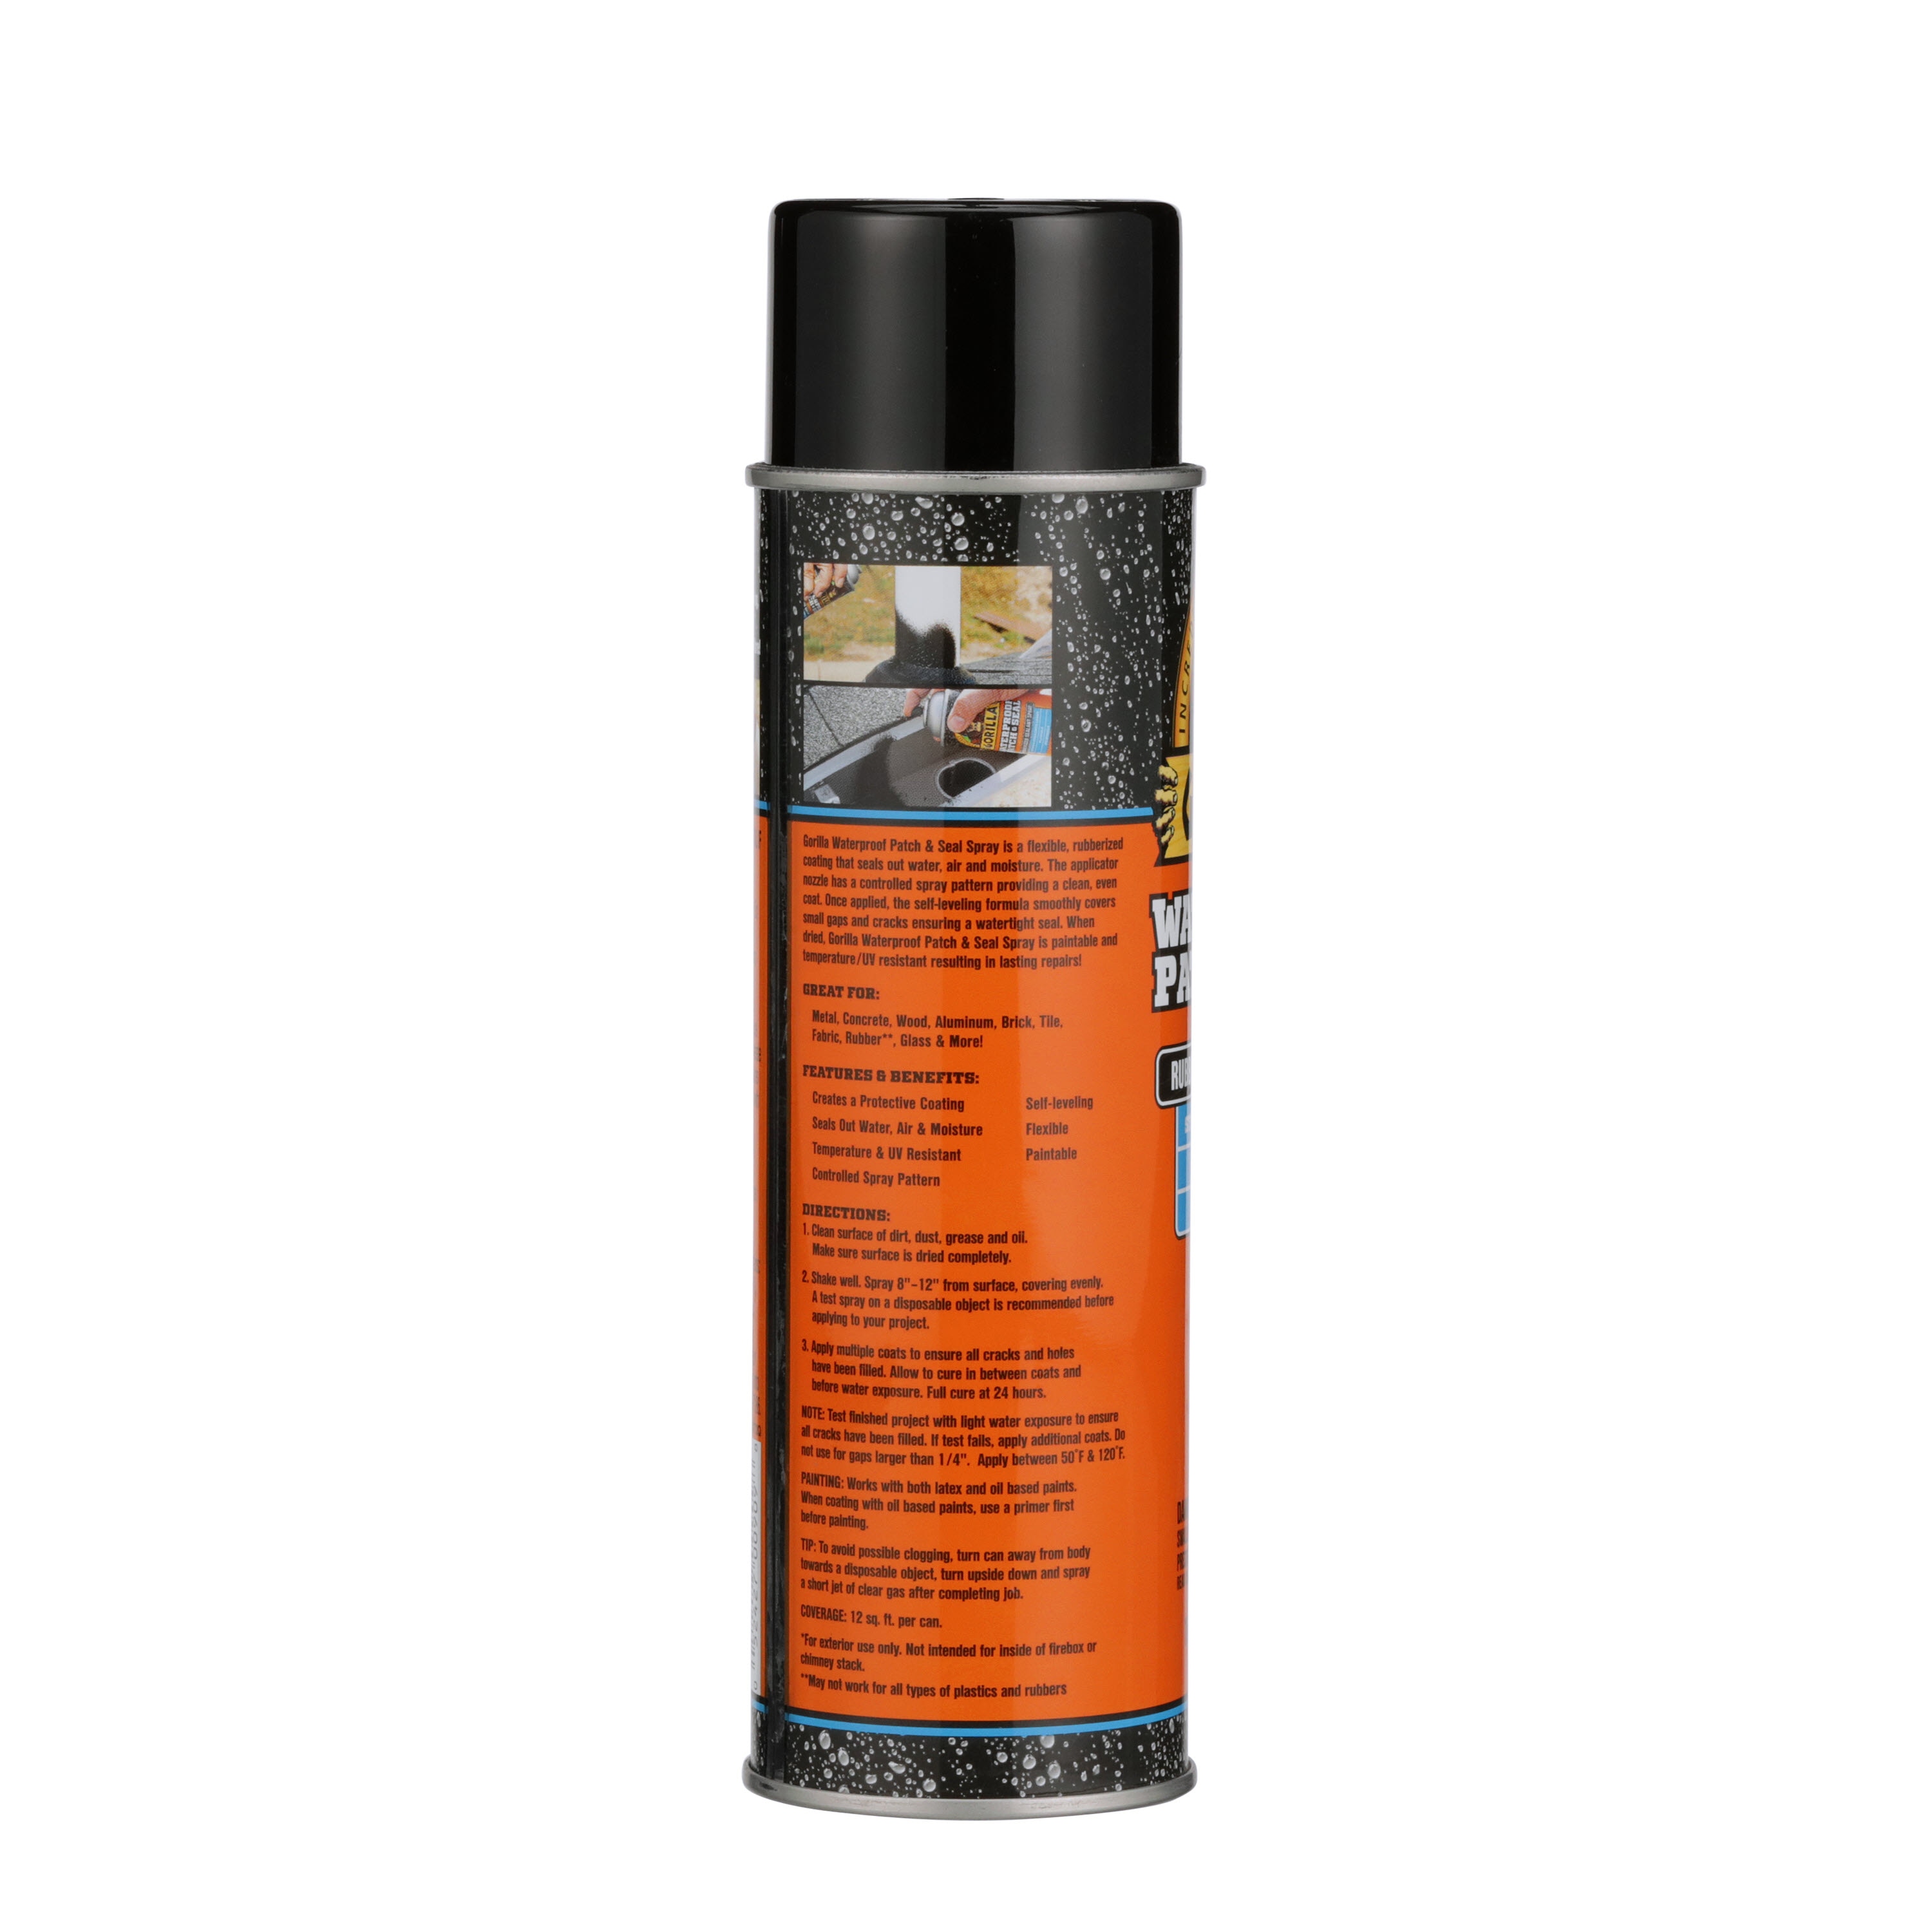 Don't Torch That Porch - Fix It With Gorilla Waterproof Patch & Seal Spray  - Home Fixated